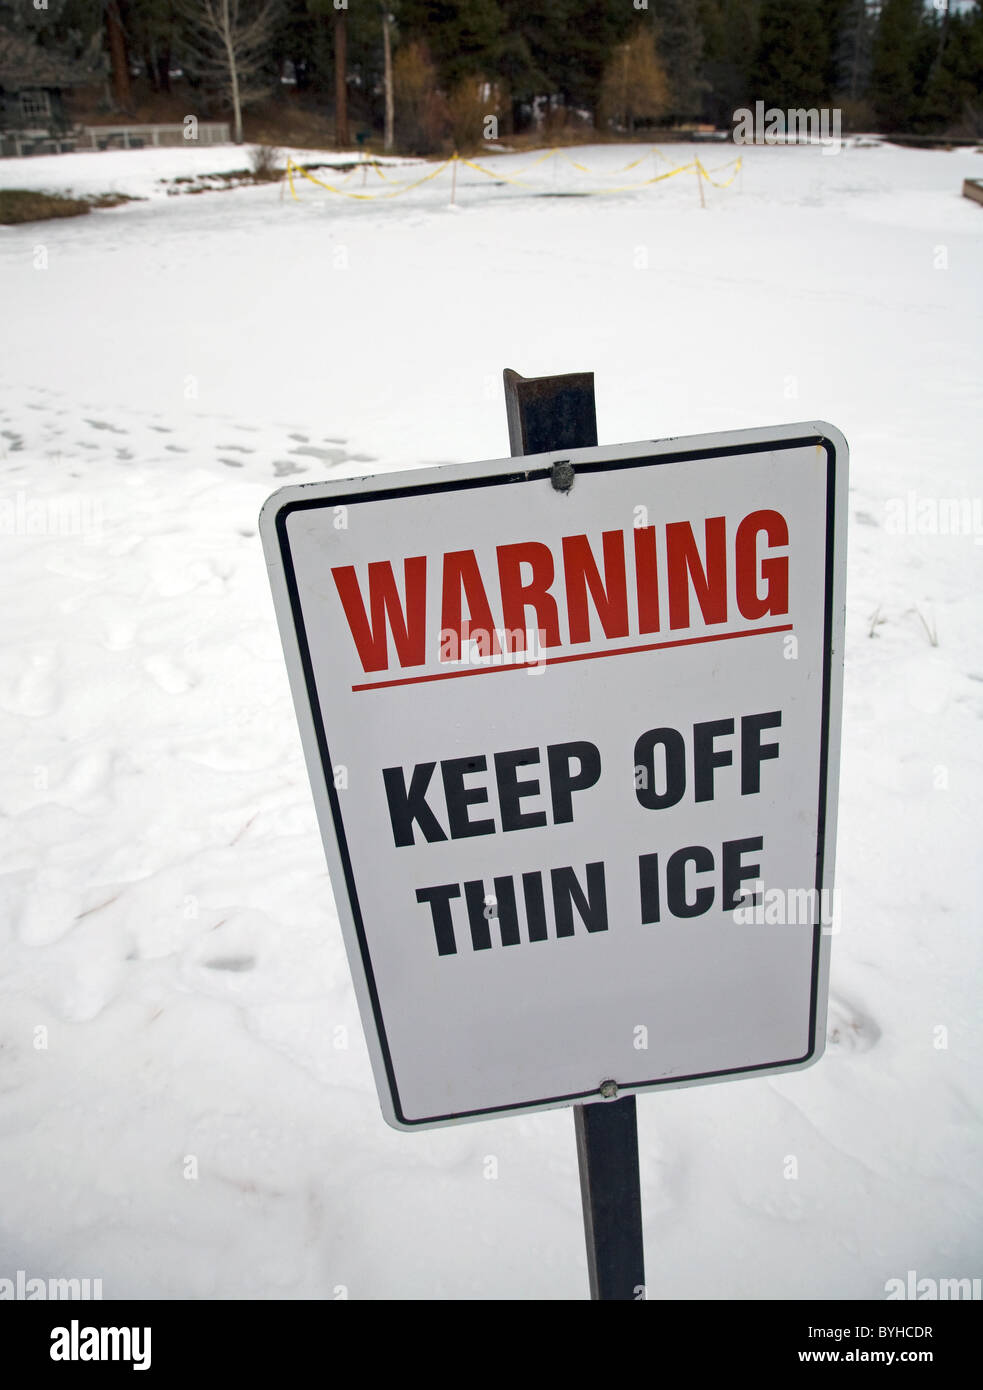 A sign warning of thin ice Stock Photo